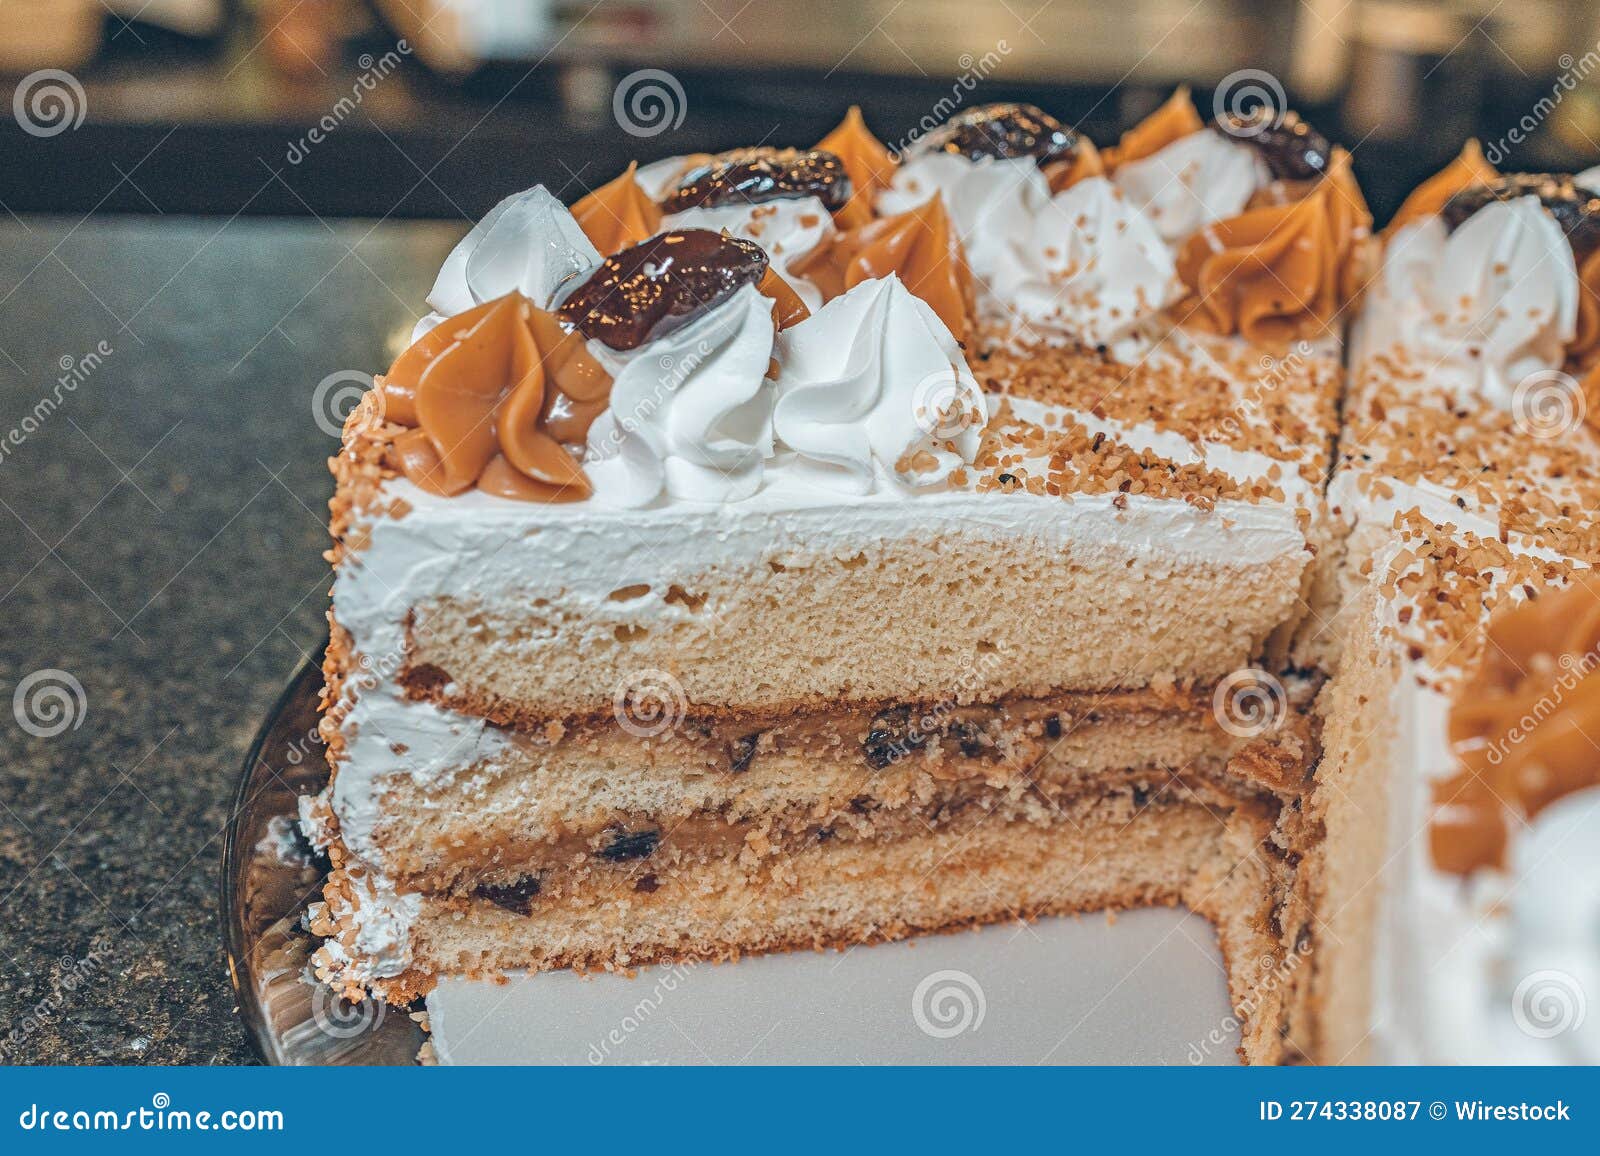 horizontal photo of a biscuit cake with cream, cherry and caramelo sauce